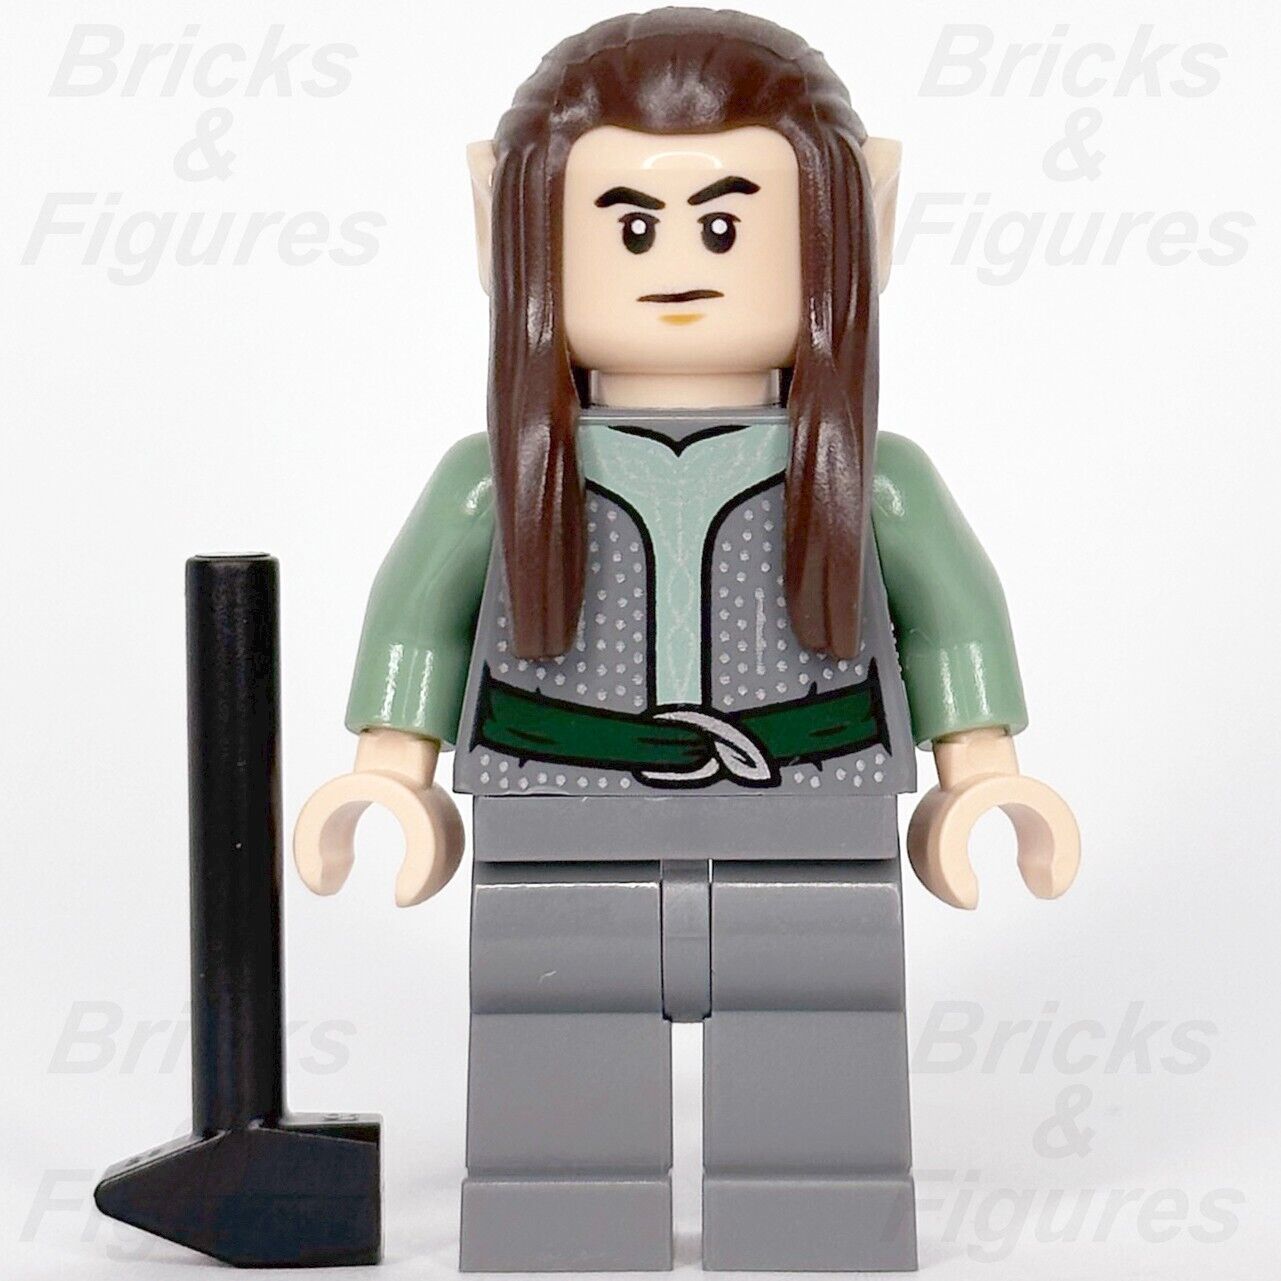 LEGO Rivendell Elf Minifigure The Hobbit & The Lord of the Rings 10316 lor122